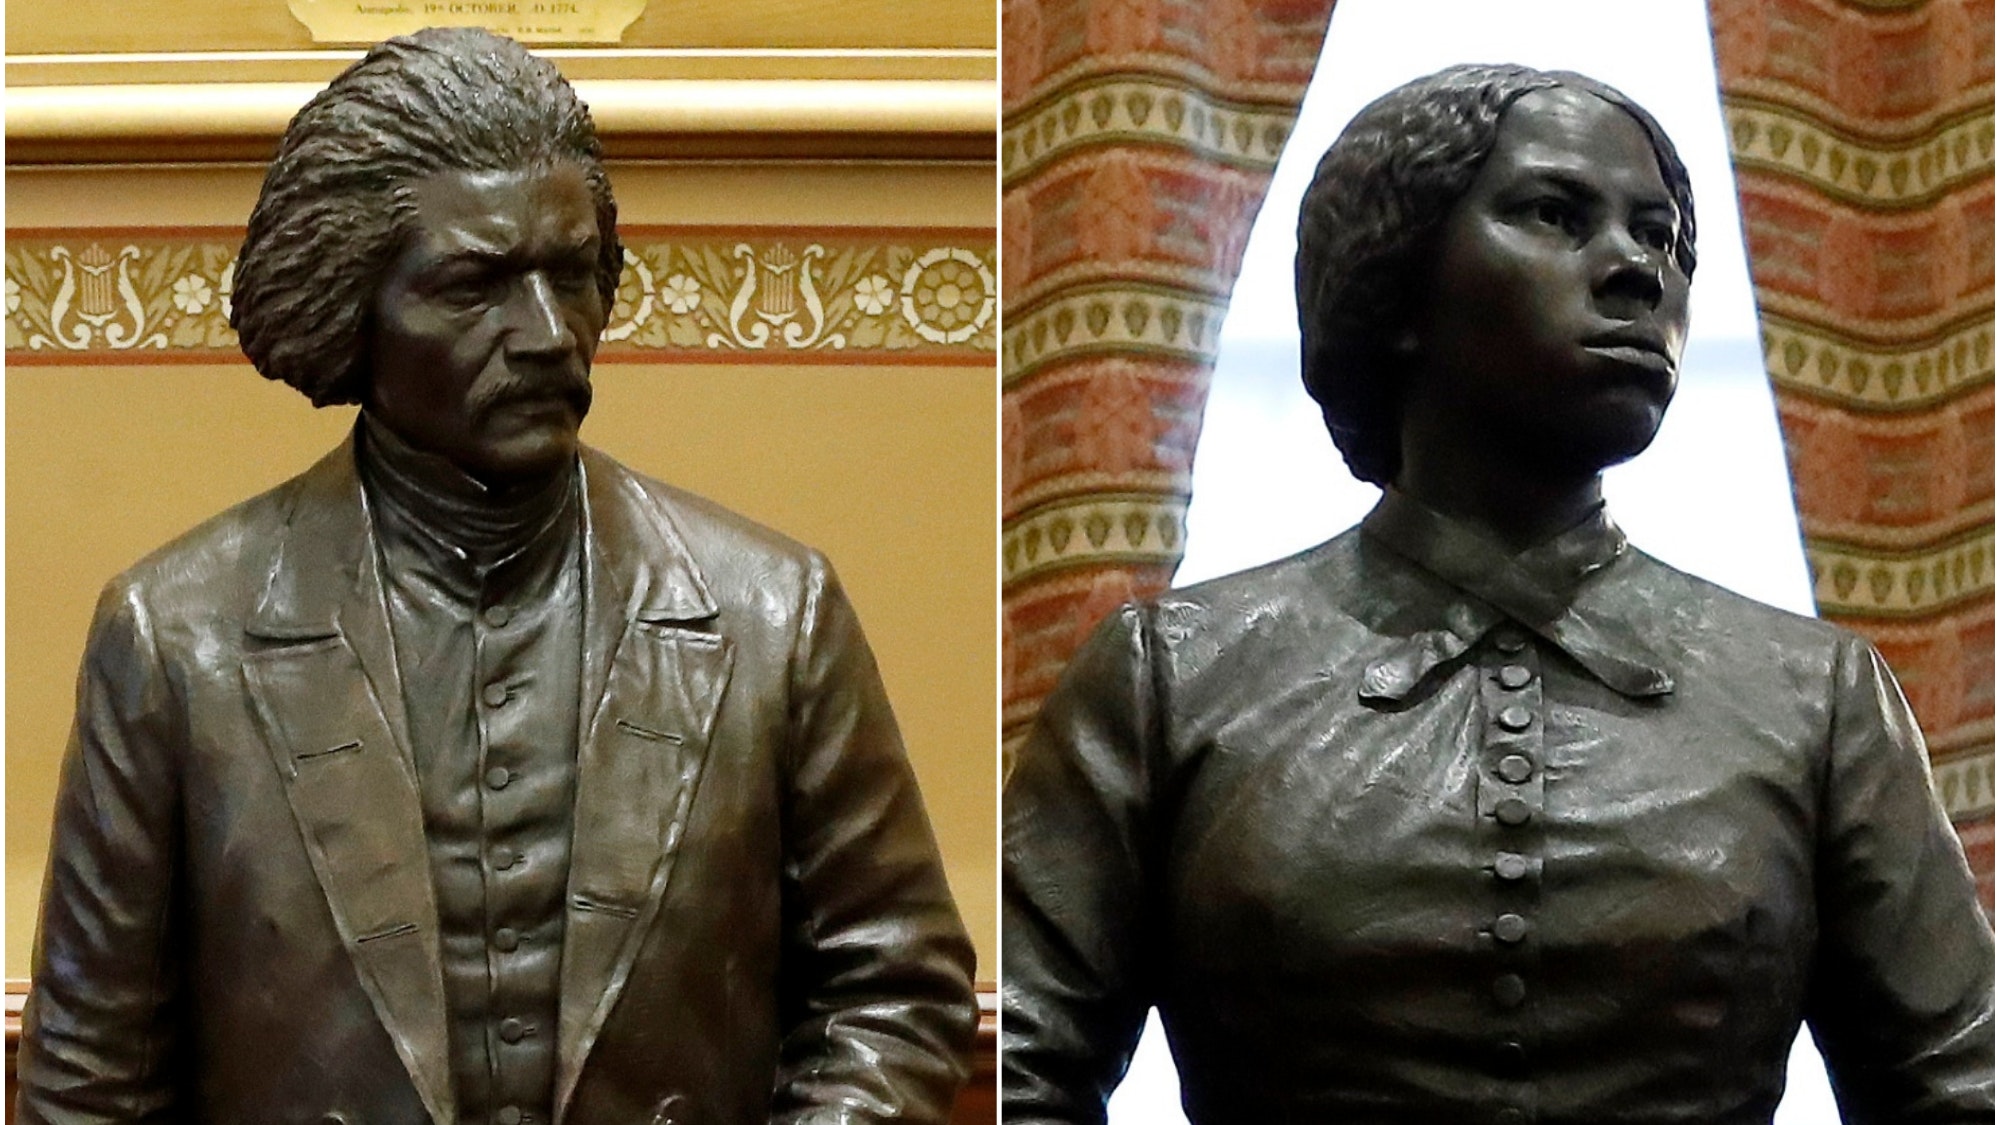 Harriet Tubman And Frederick Douglass Statues Revealed In Maryland